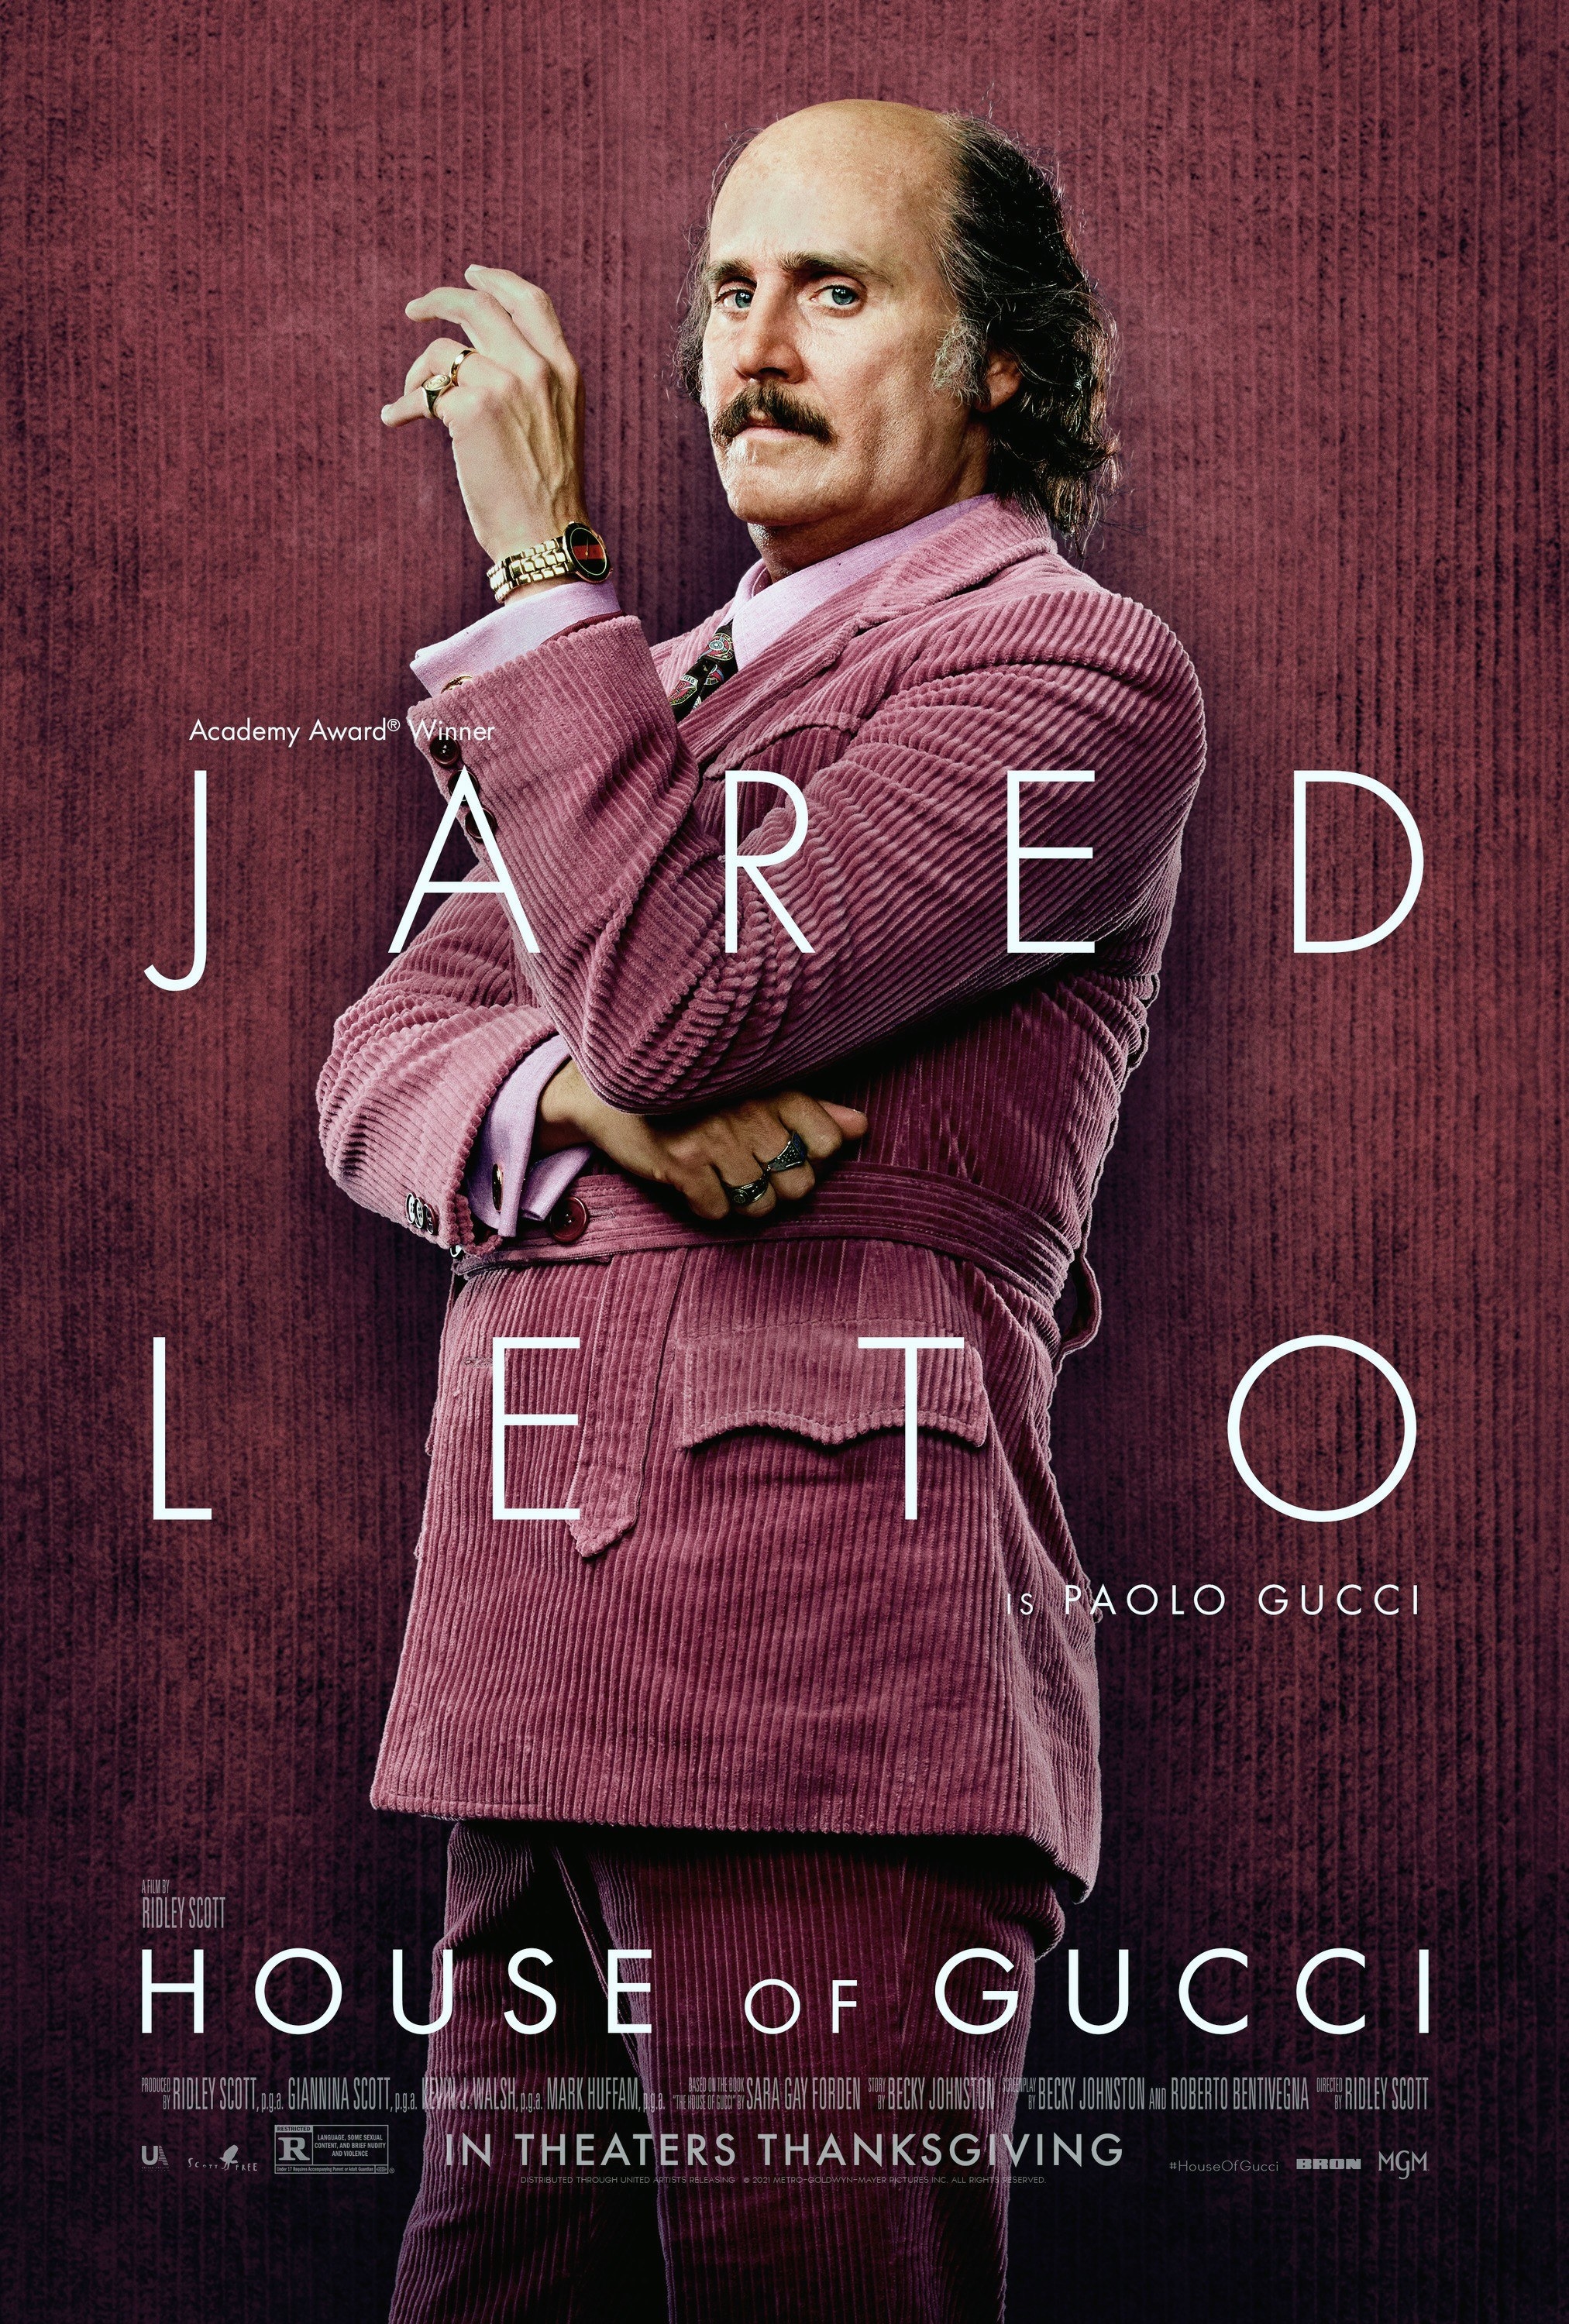 Leto crosses his arms in the House of Gucci poster